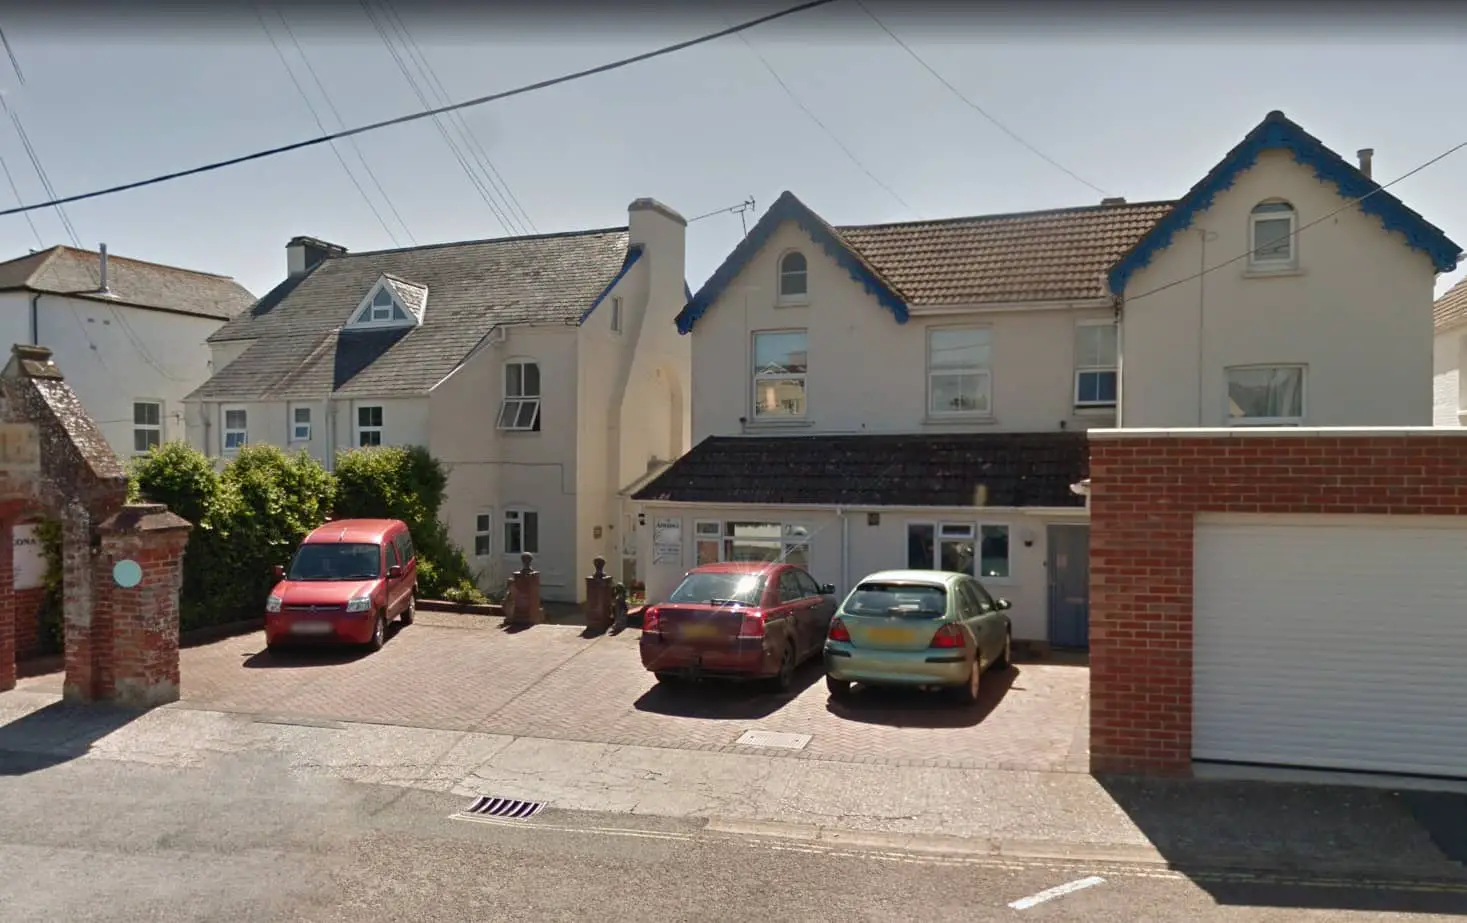 Google Maps photo of the Care Home on The Square